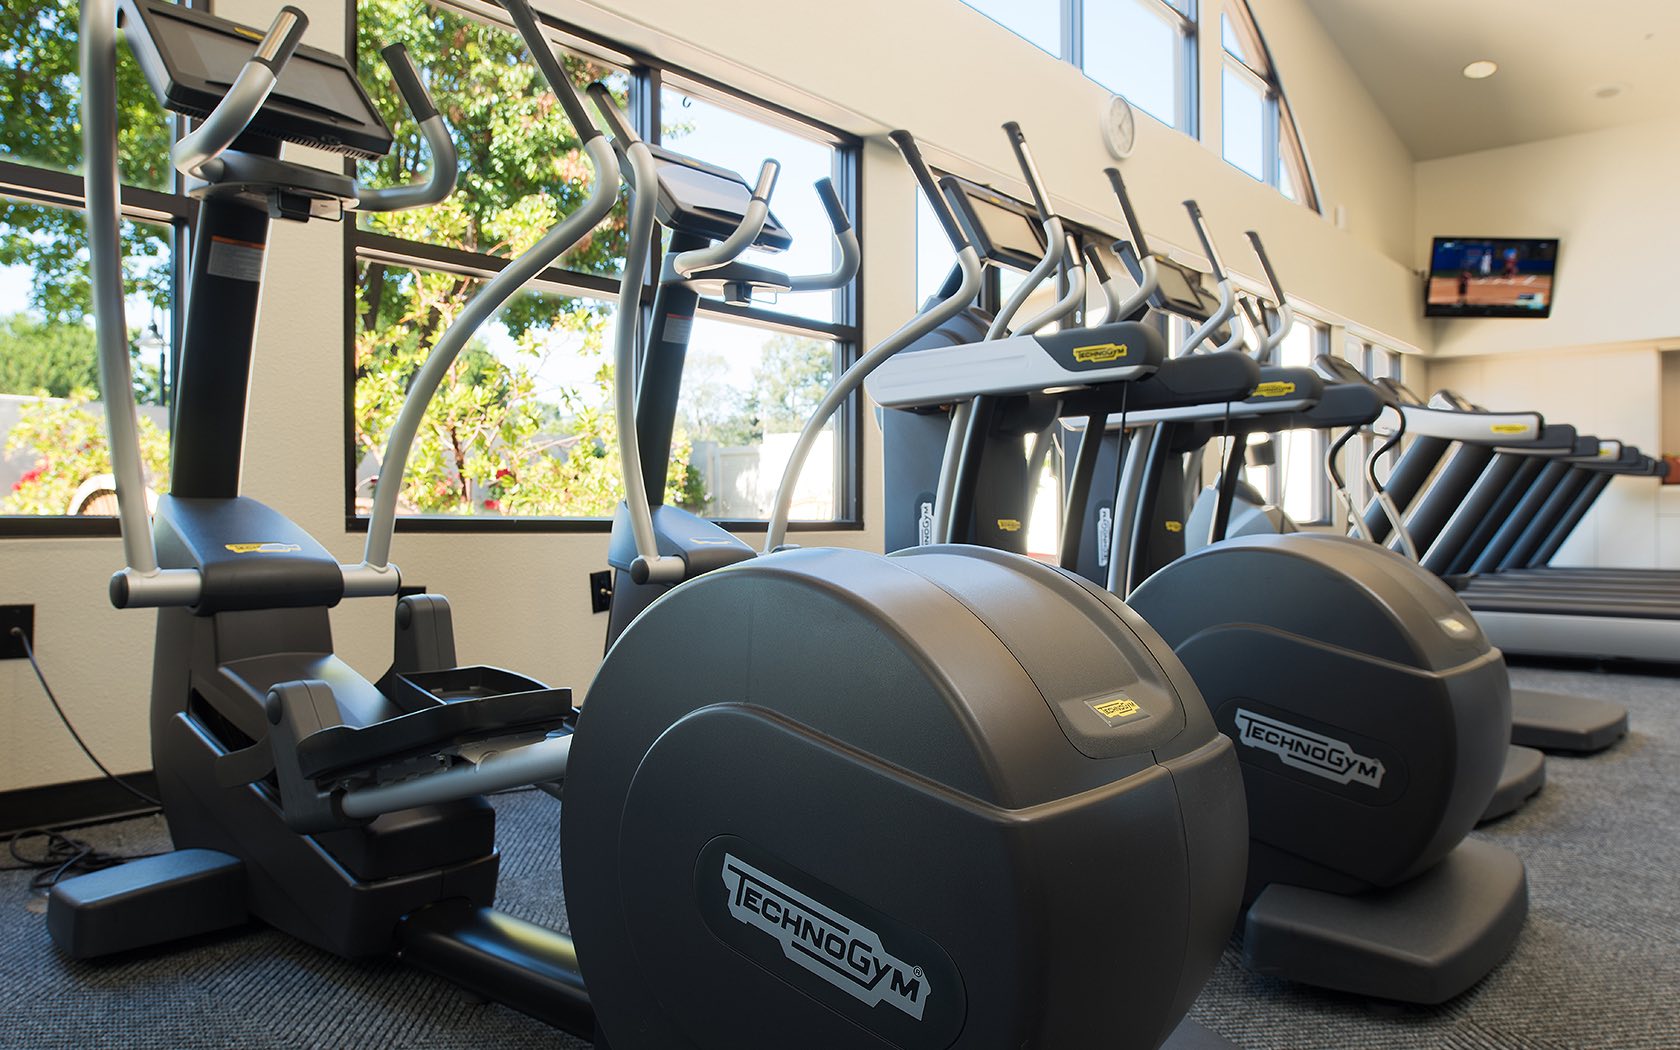 TechnoGym elliptical located at the Spa fitness center.